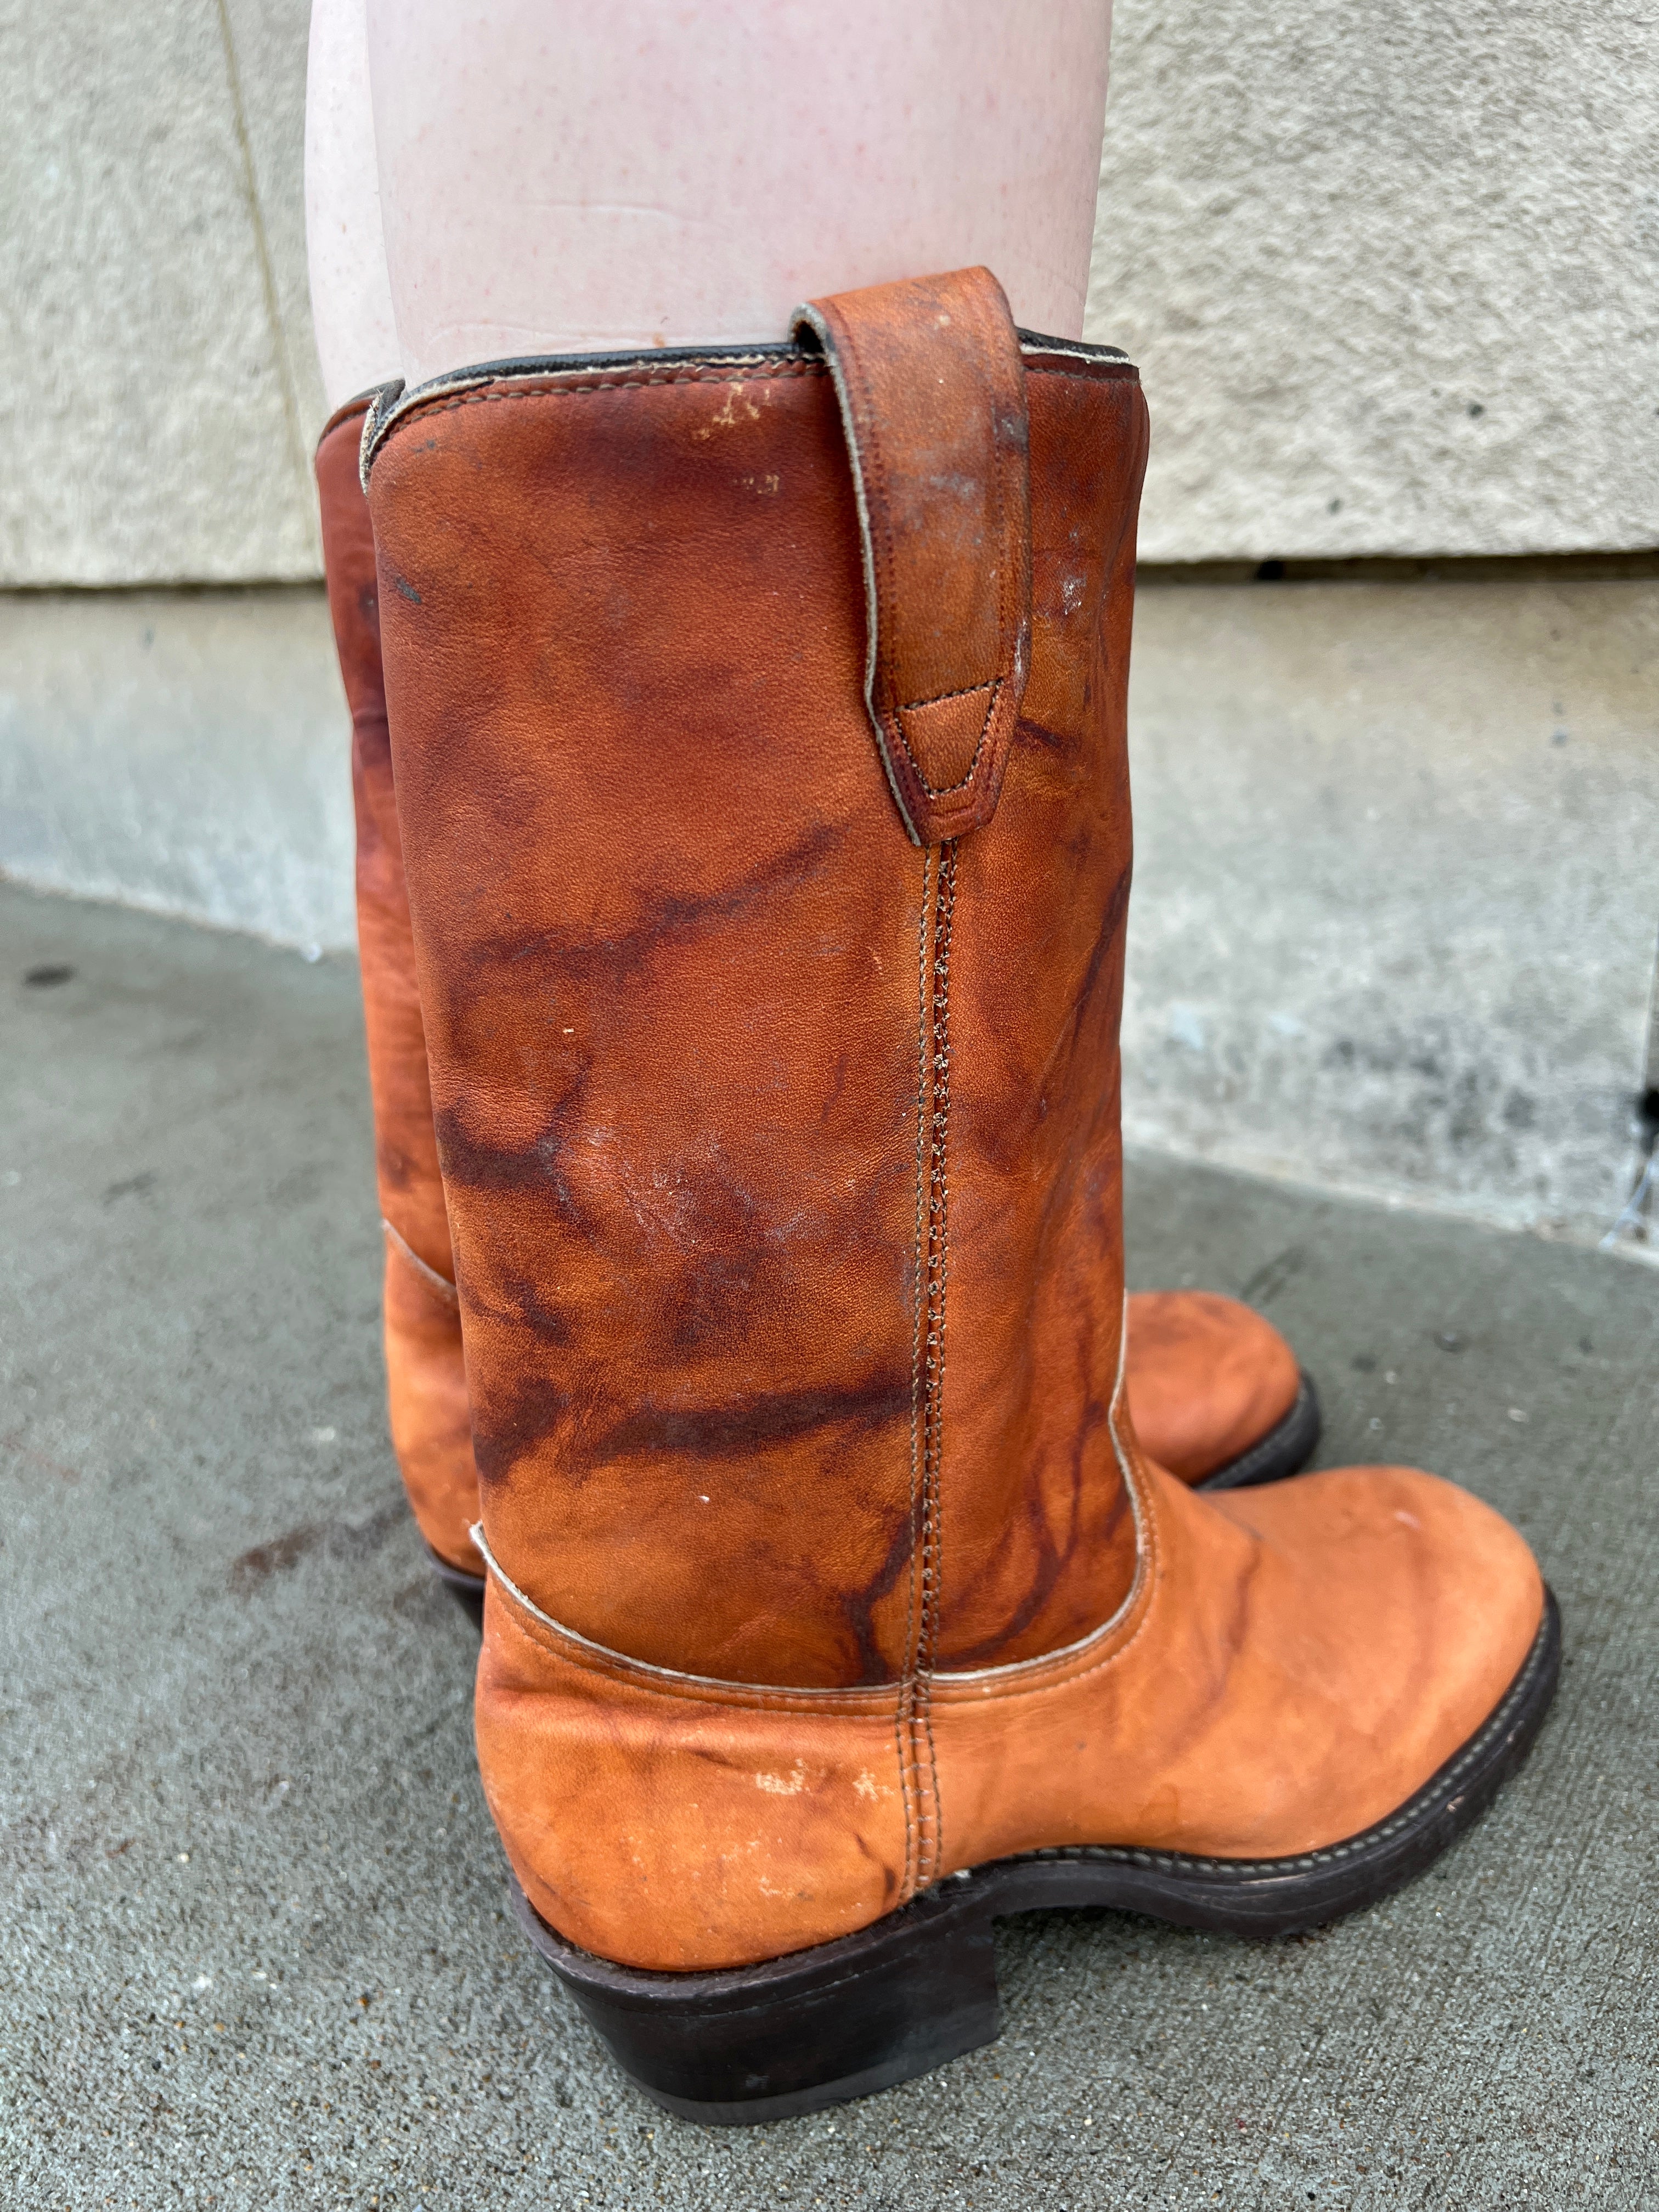 70s Brown Square Toe Boots, Campus, New Old Stock – The Hip Zipper